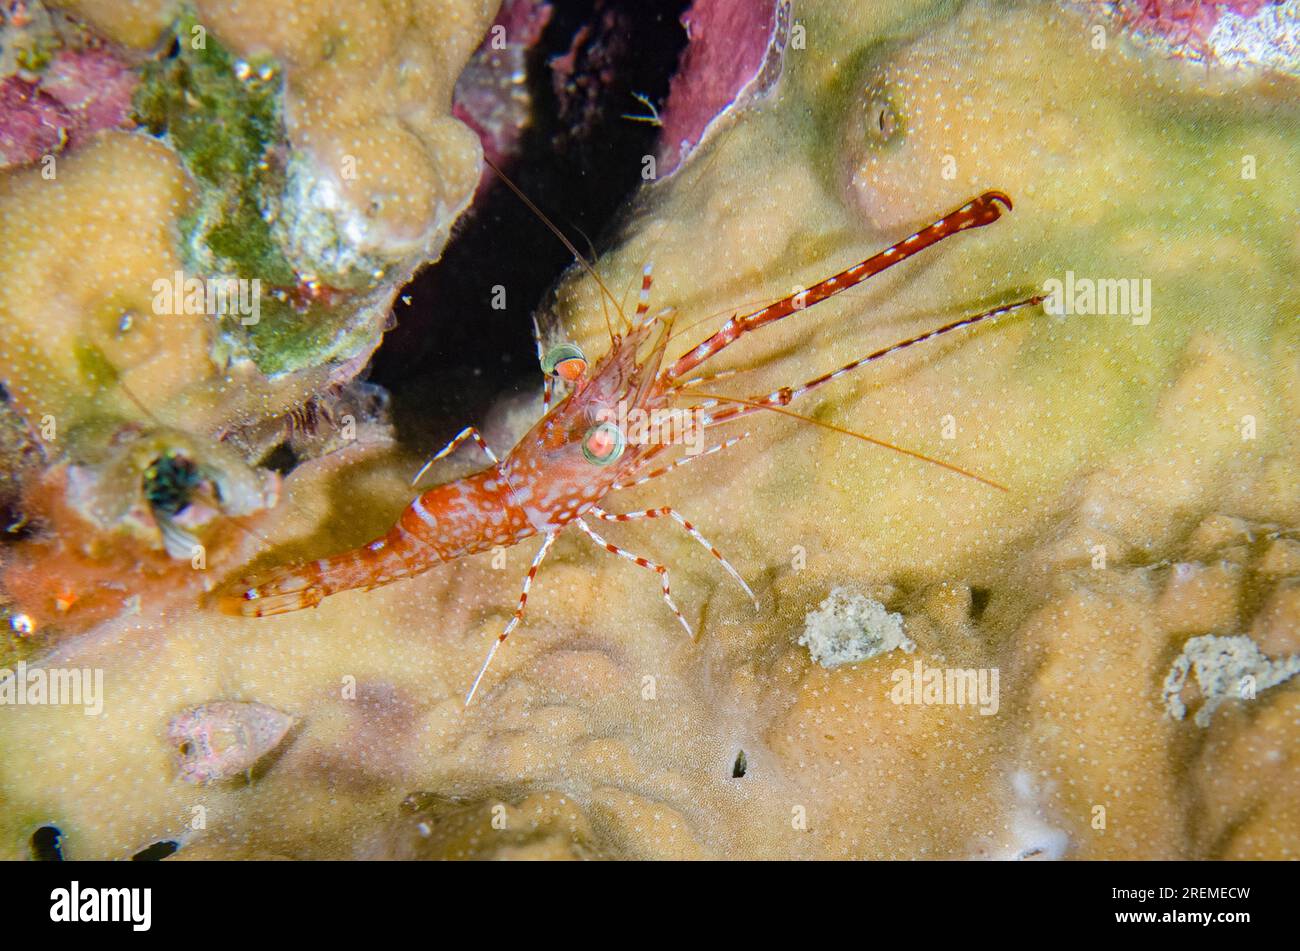 Reticulated Hinge-beak Shrimp, Cinetorhynchus reticulatus, with long claws on Hard Coral, Scleractinia Order, night dive, Mimpi Channel Jetty dive sit Stock Photo